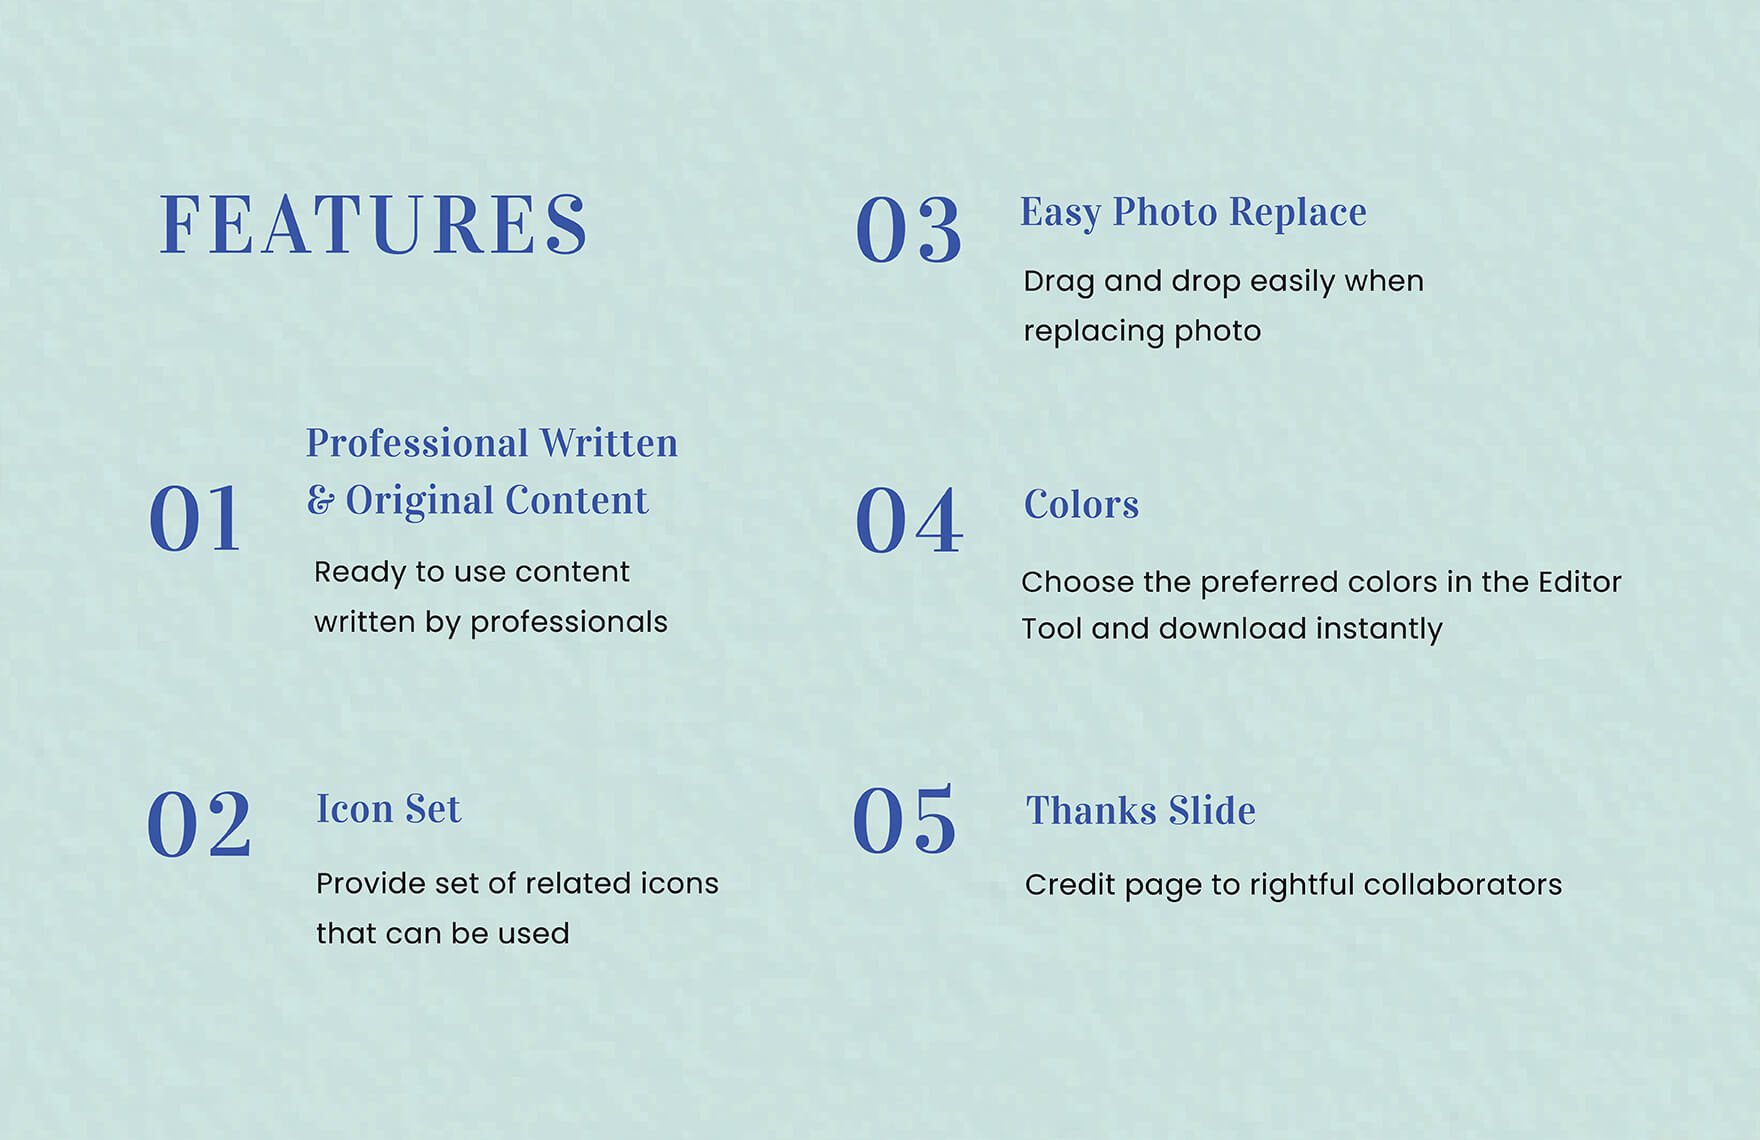 Watercolor Style PowerPoint Template